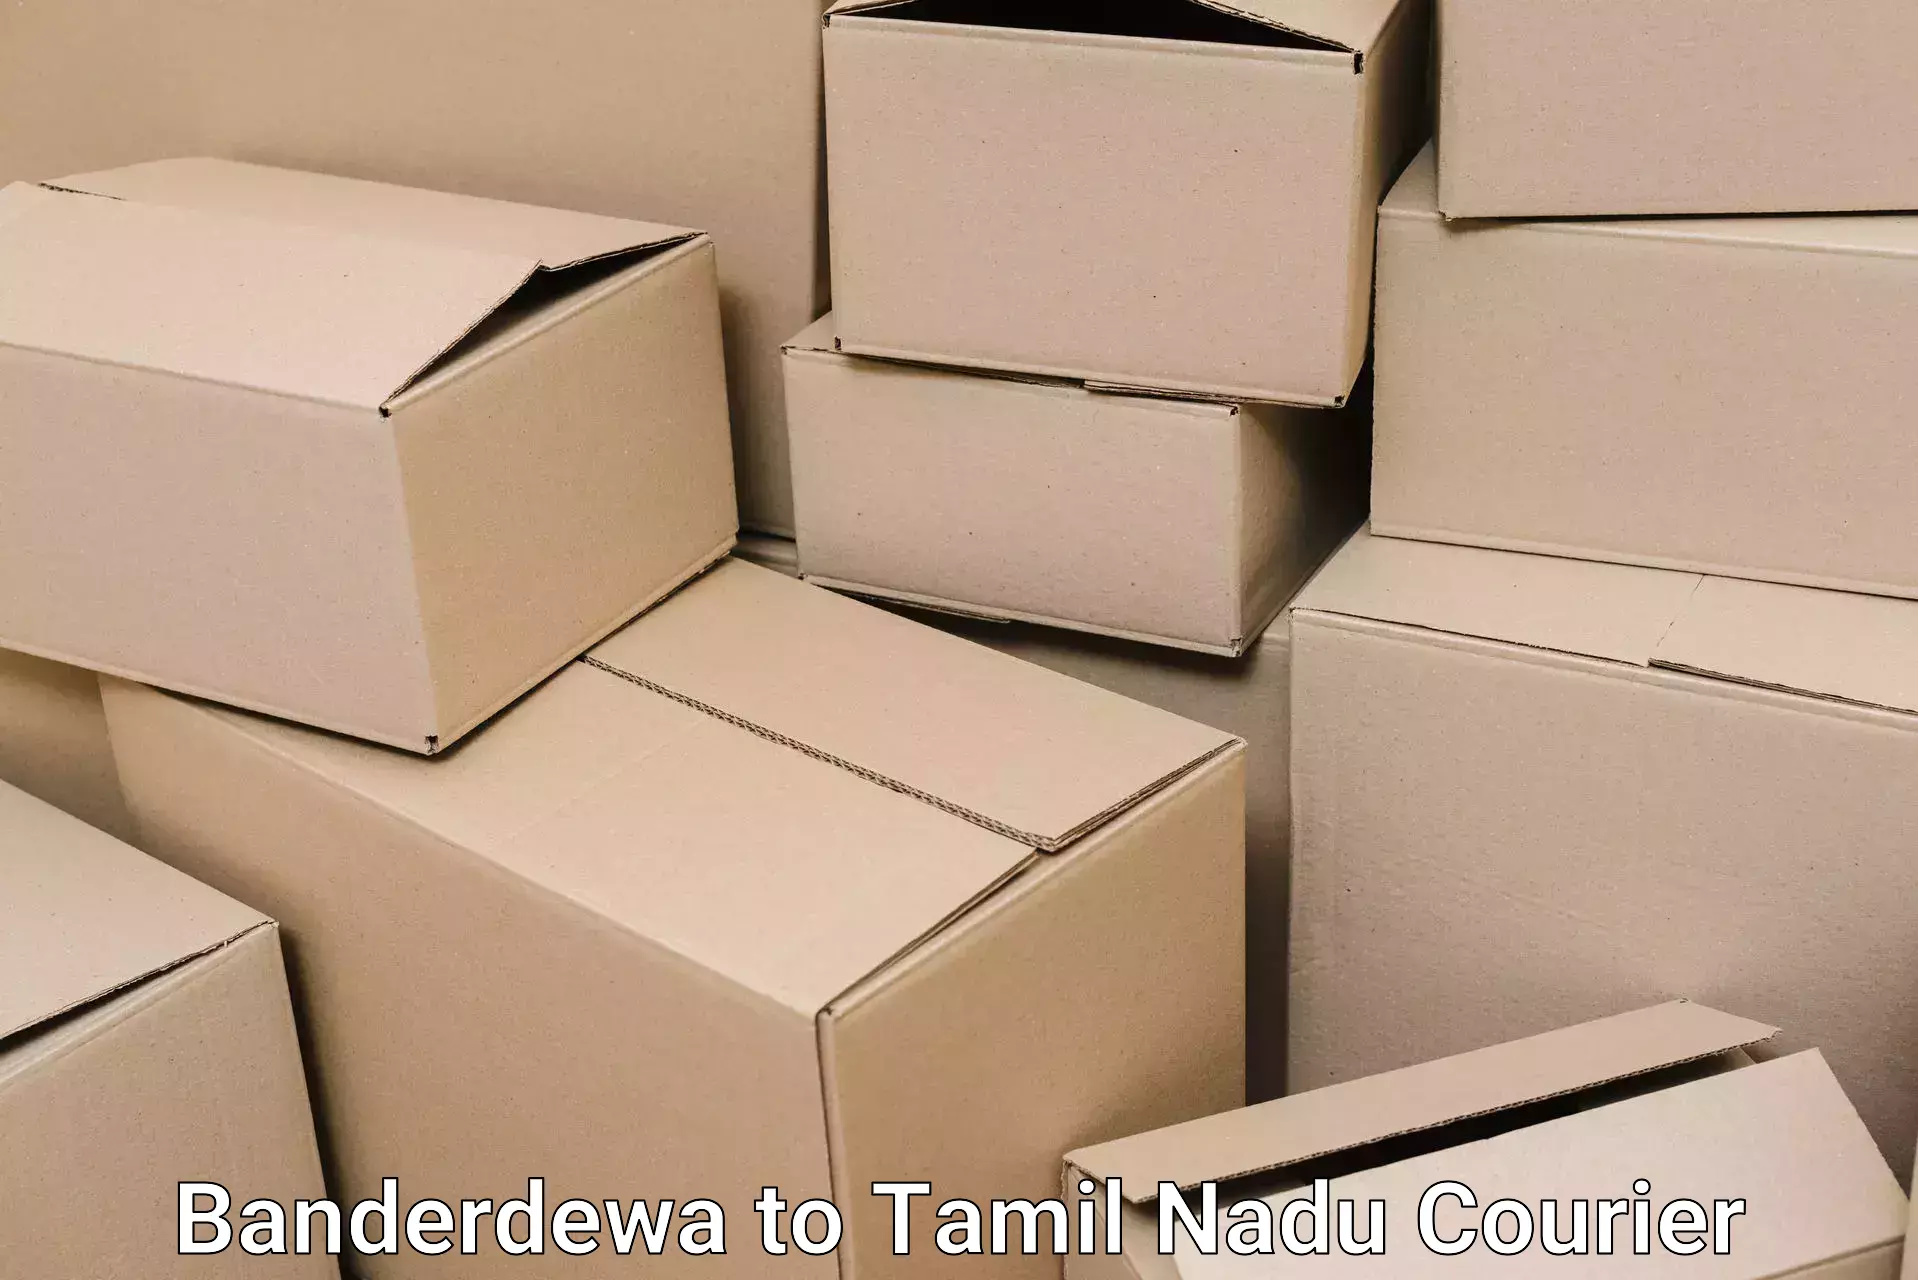 Quality moving company in Banderdewa to Thanjavur